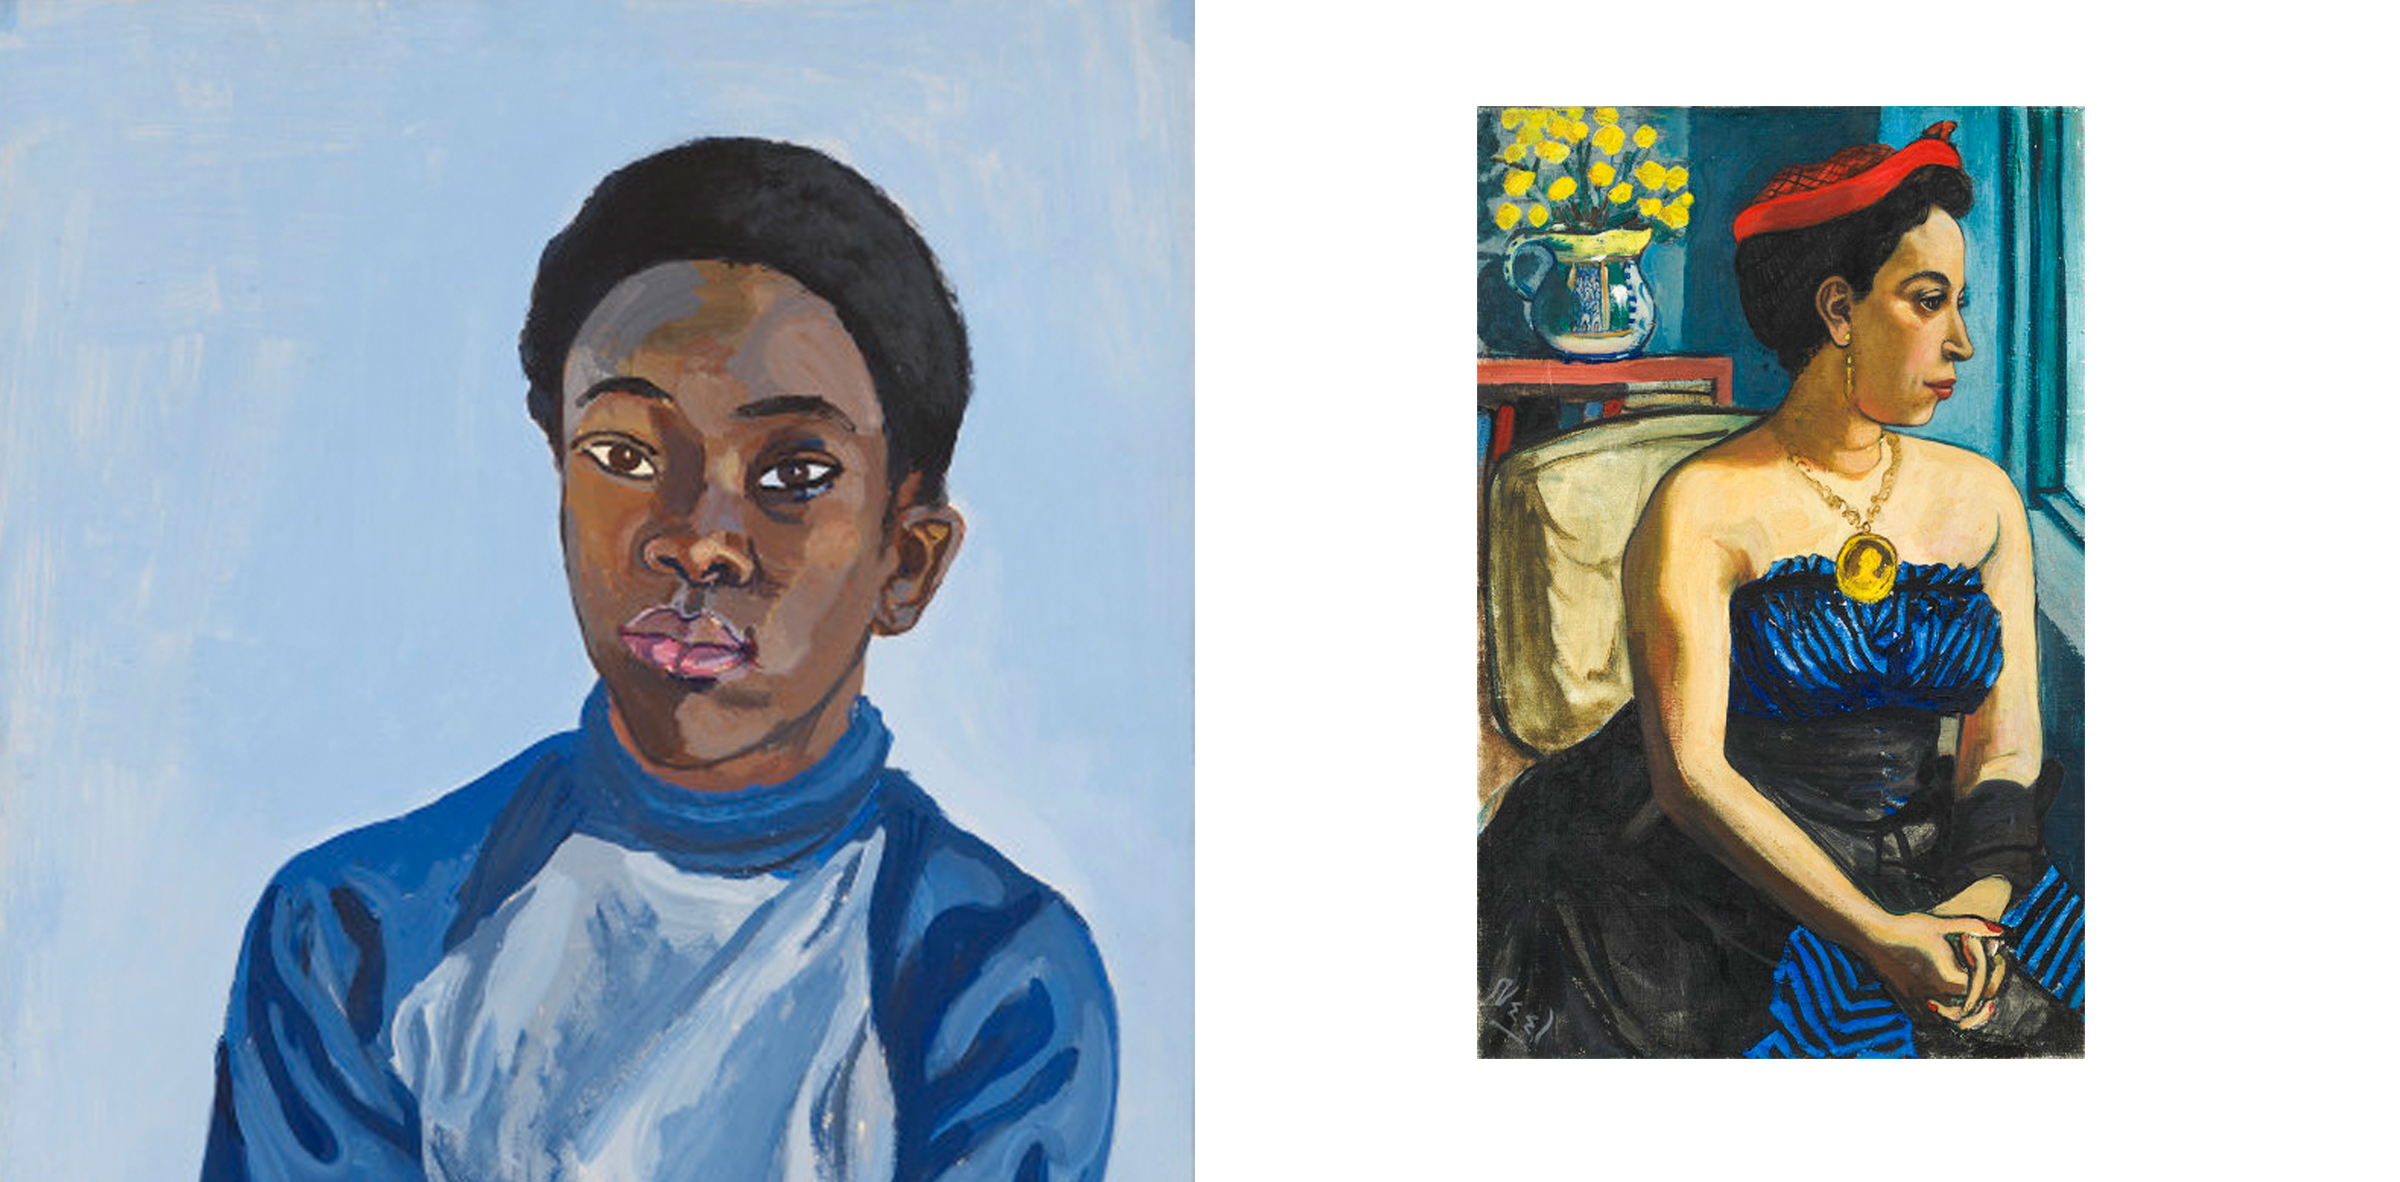 STORY_London. Via New York, LA and Bradford.From North to South David Hockney in Bradford and Alice Neel in London. Contributing Features Writer, Hannah Tuck considers how David Hockney & Alice Neel began to produce art as ‘outsiders'."